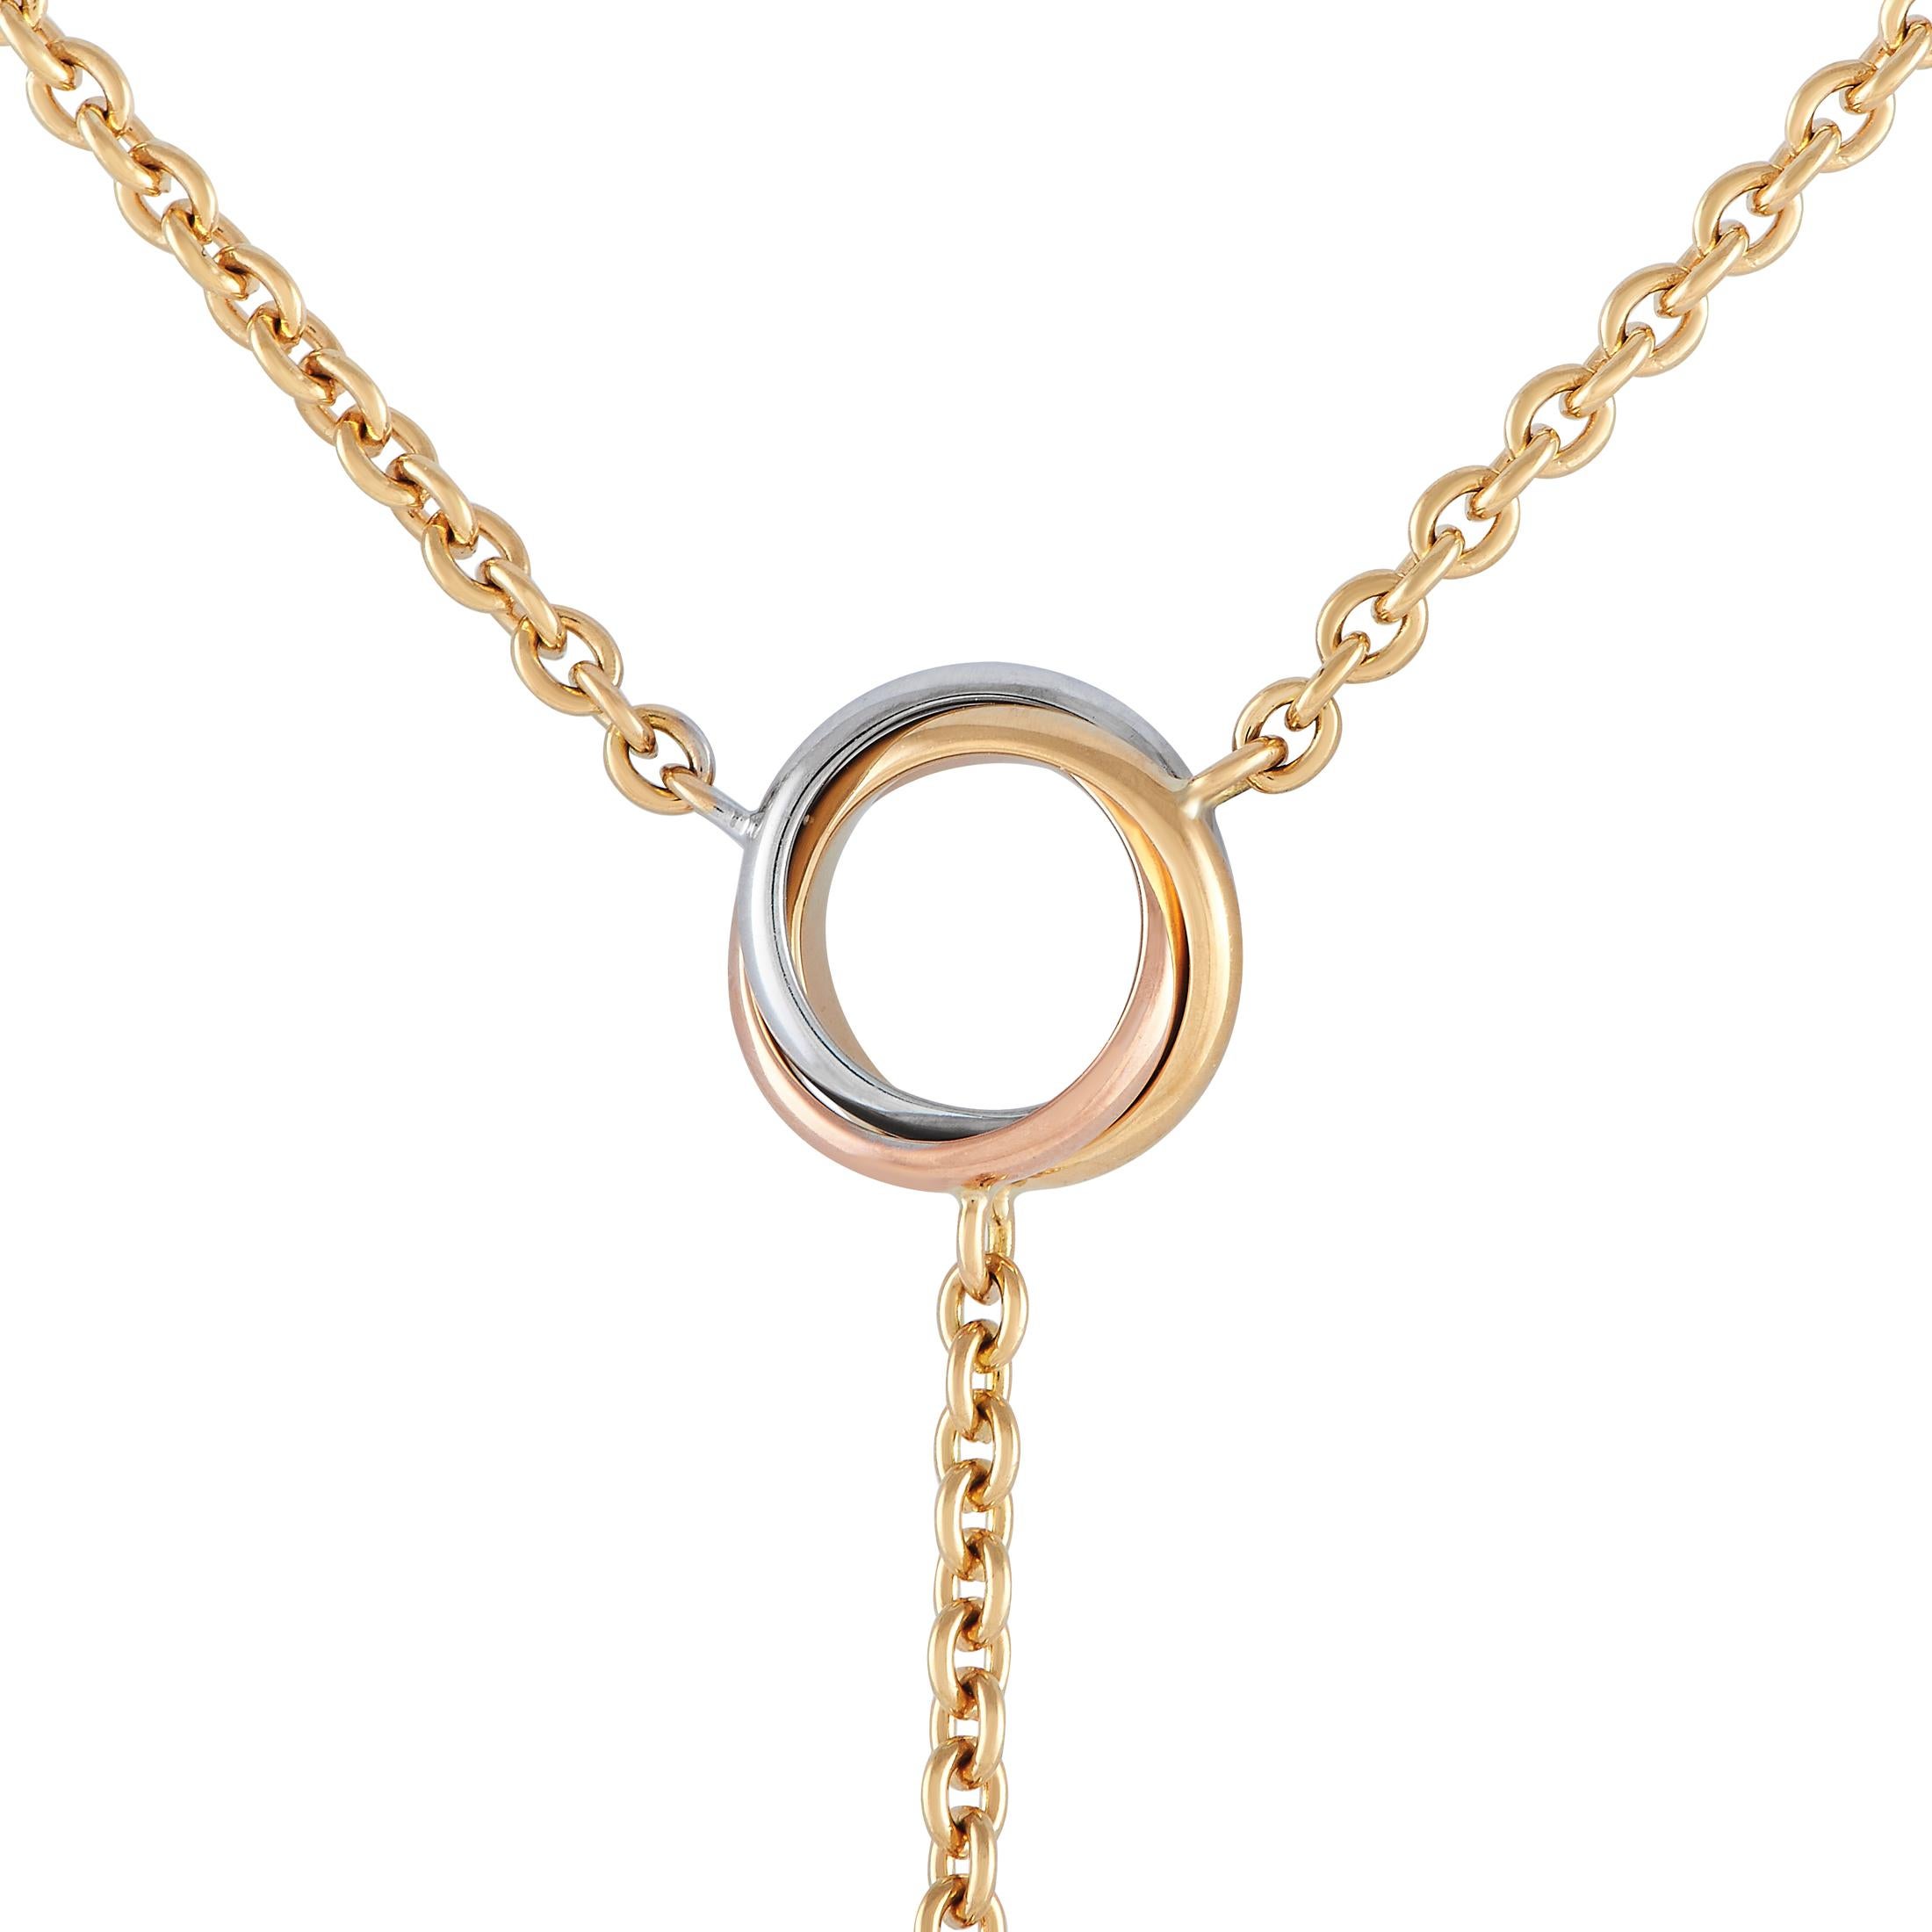 Delicate and dramatic all at once, this Cartier Trinity necklace is undeniably eye-catching. A sleek 18K Yellow Gold chain measuring 14” encircles the neck, while a 0.50” round circle made from intertwined bands of 18K White Gold, 18K Yellow Gold,